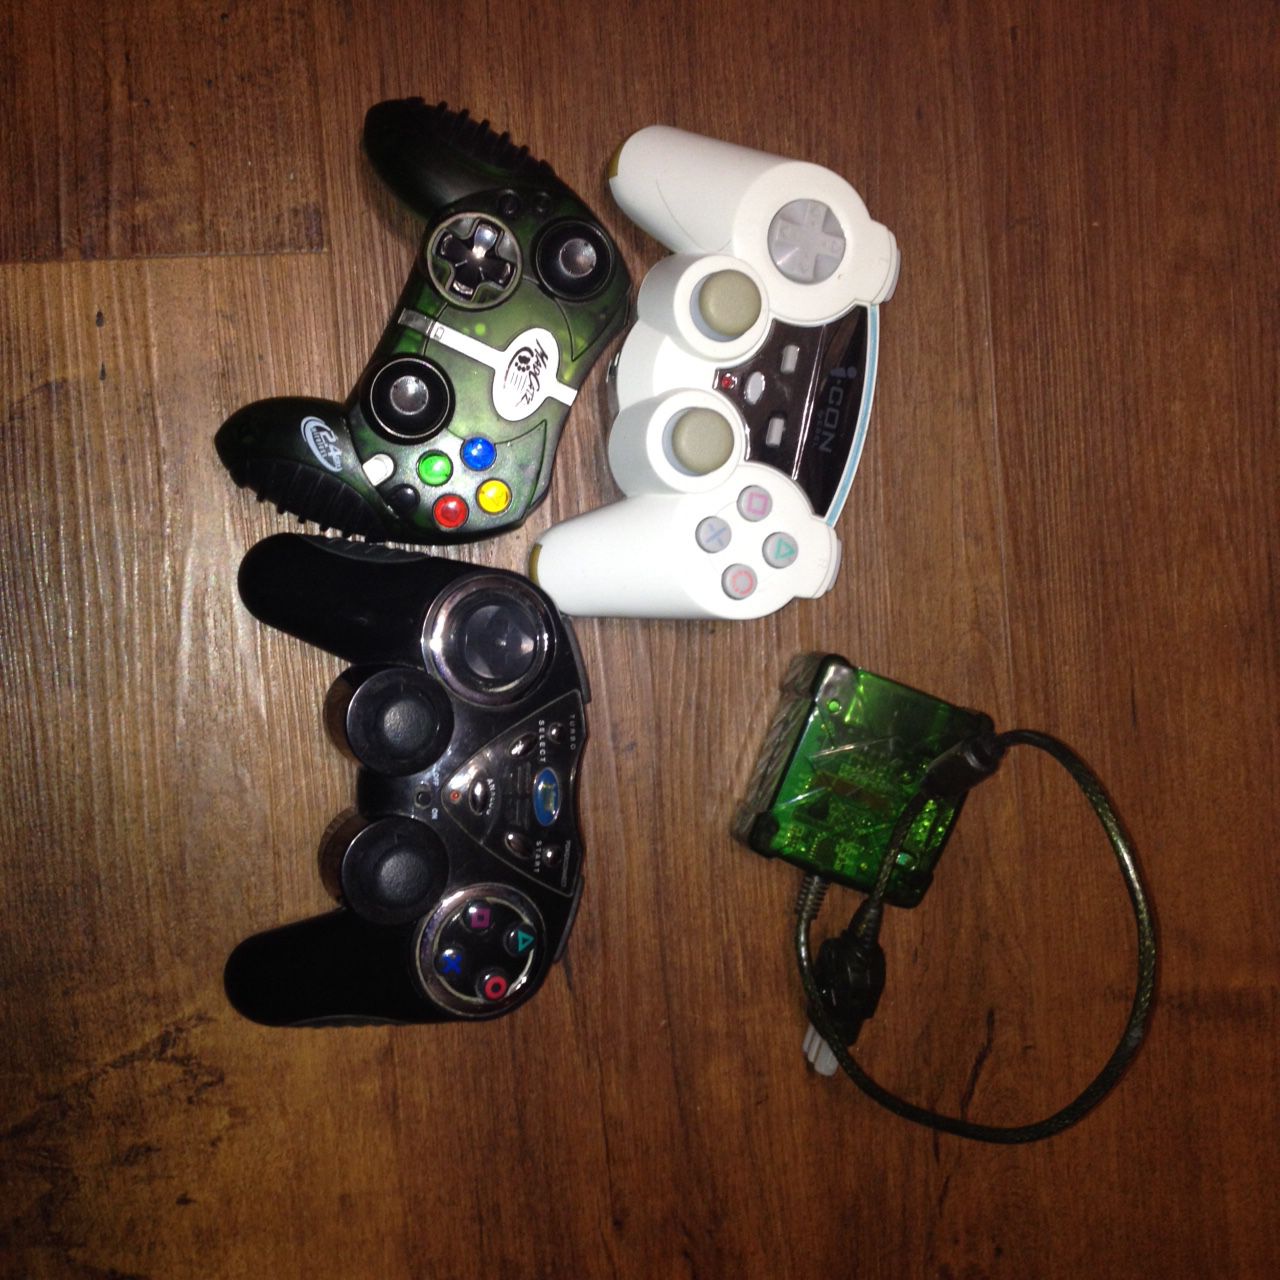 Video Game controllers untested